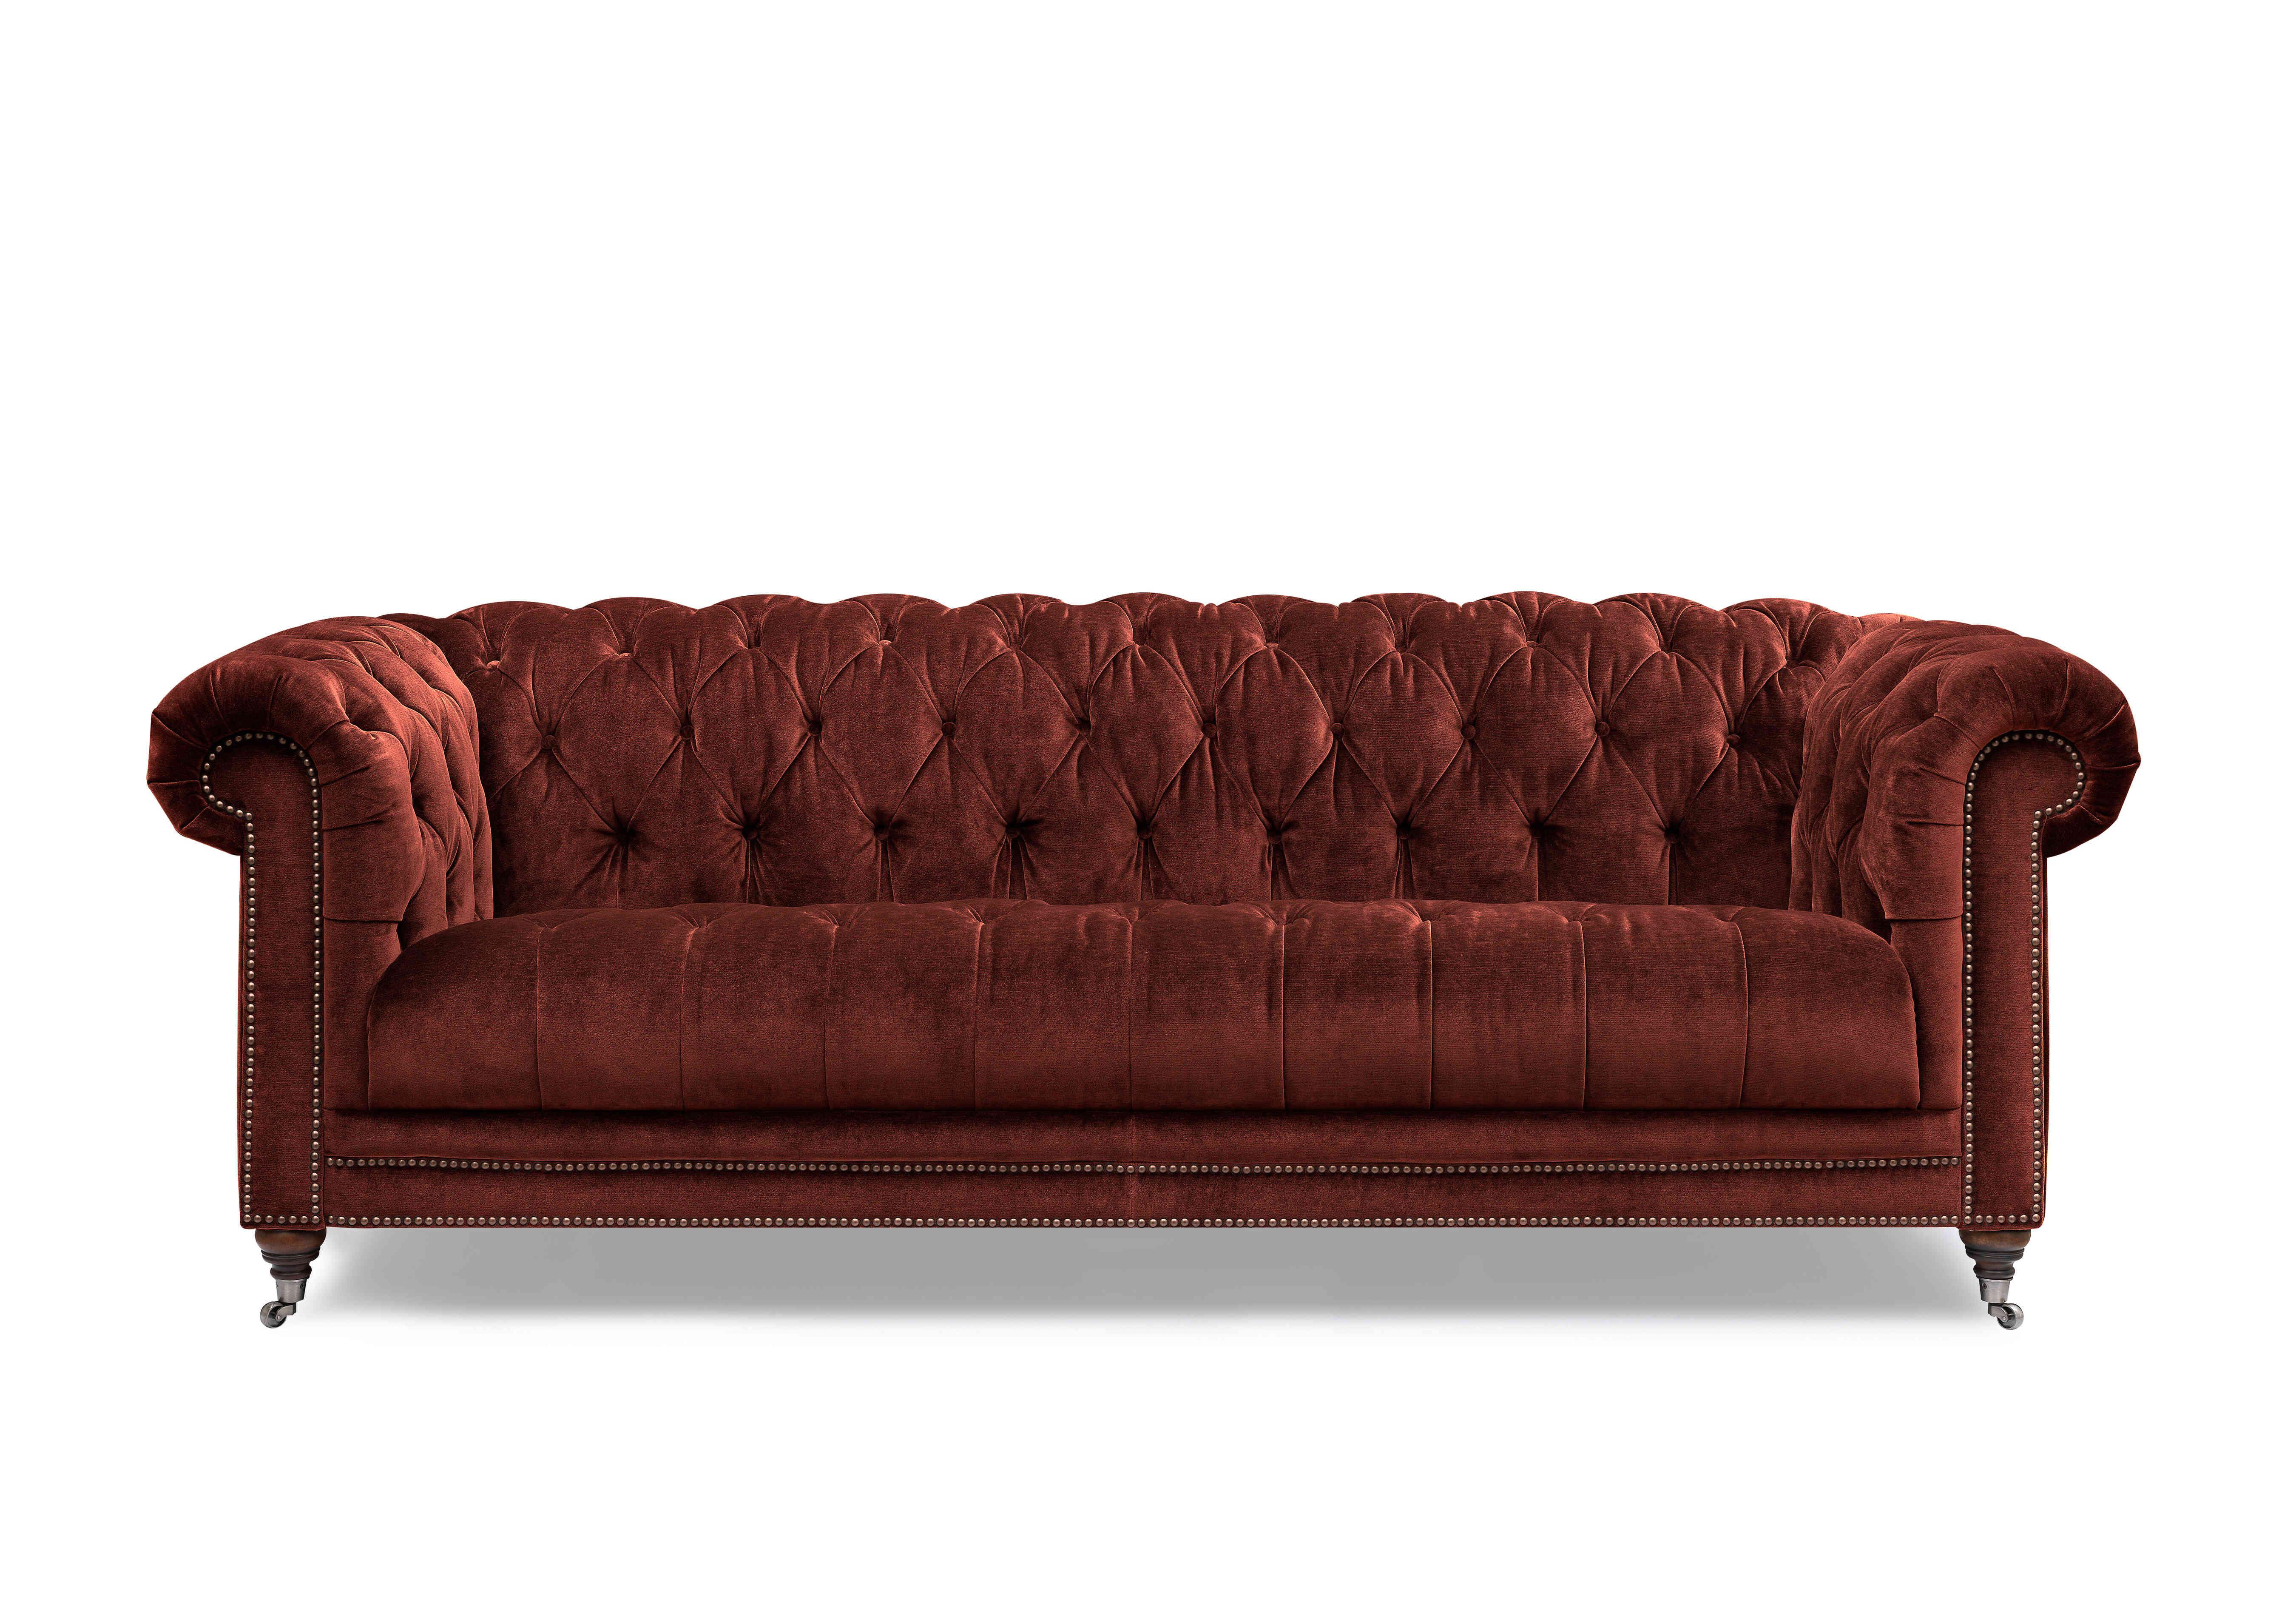 Walter 4 Seater Fabric Chesterfield Sofa in X3y1-W019 Tawny on Furniture Village